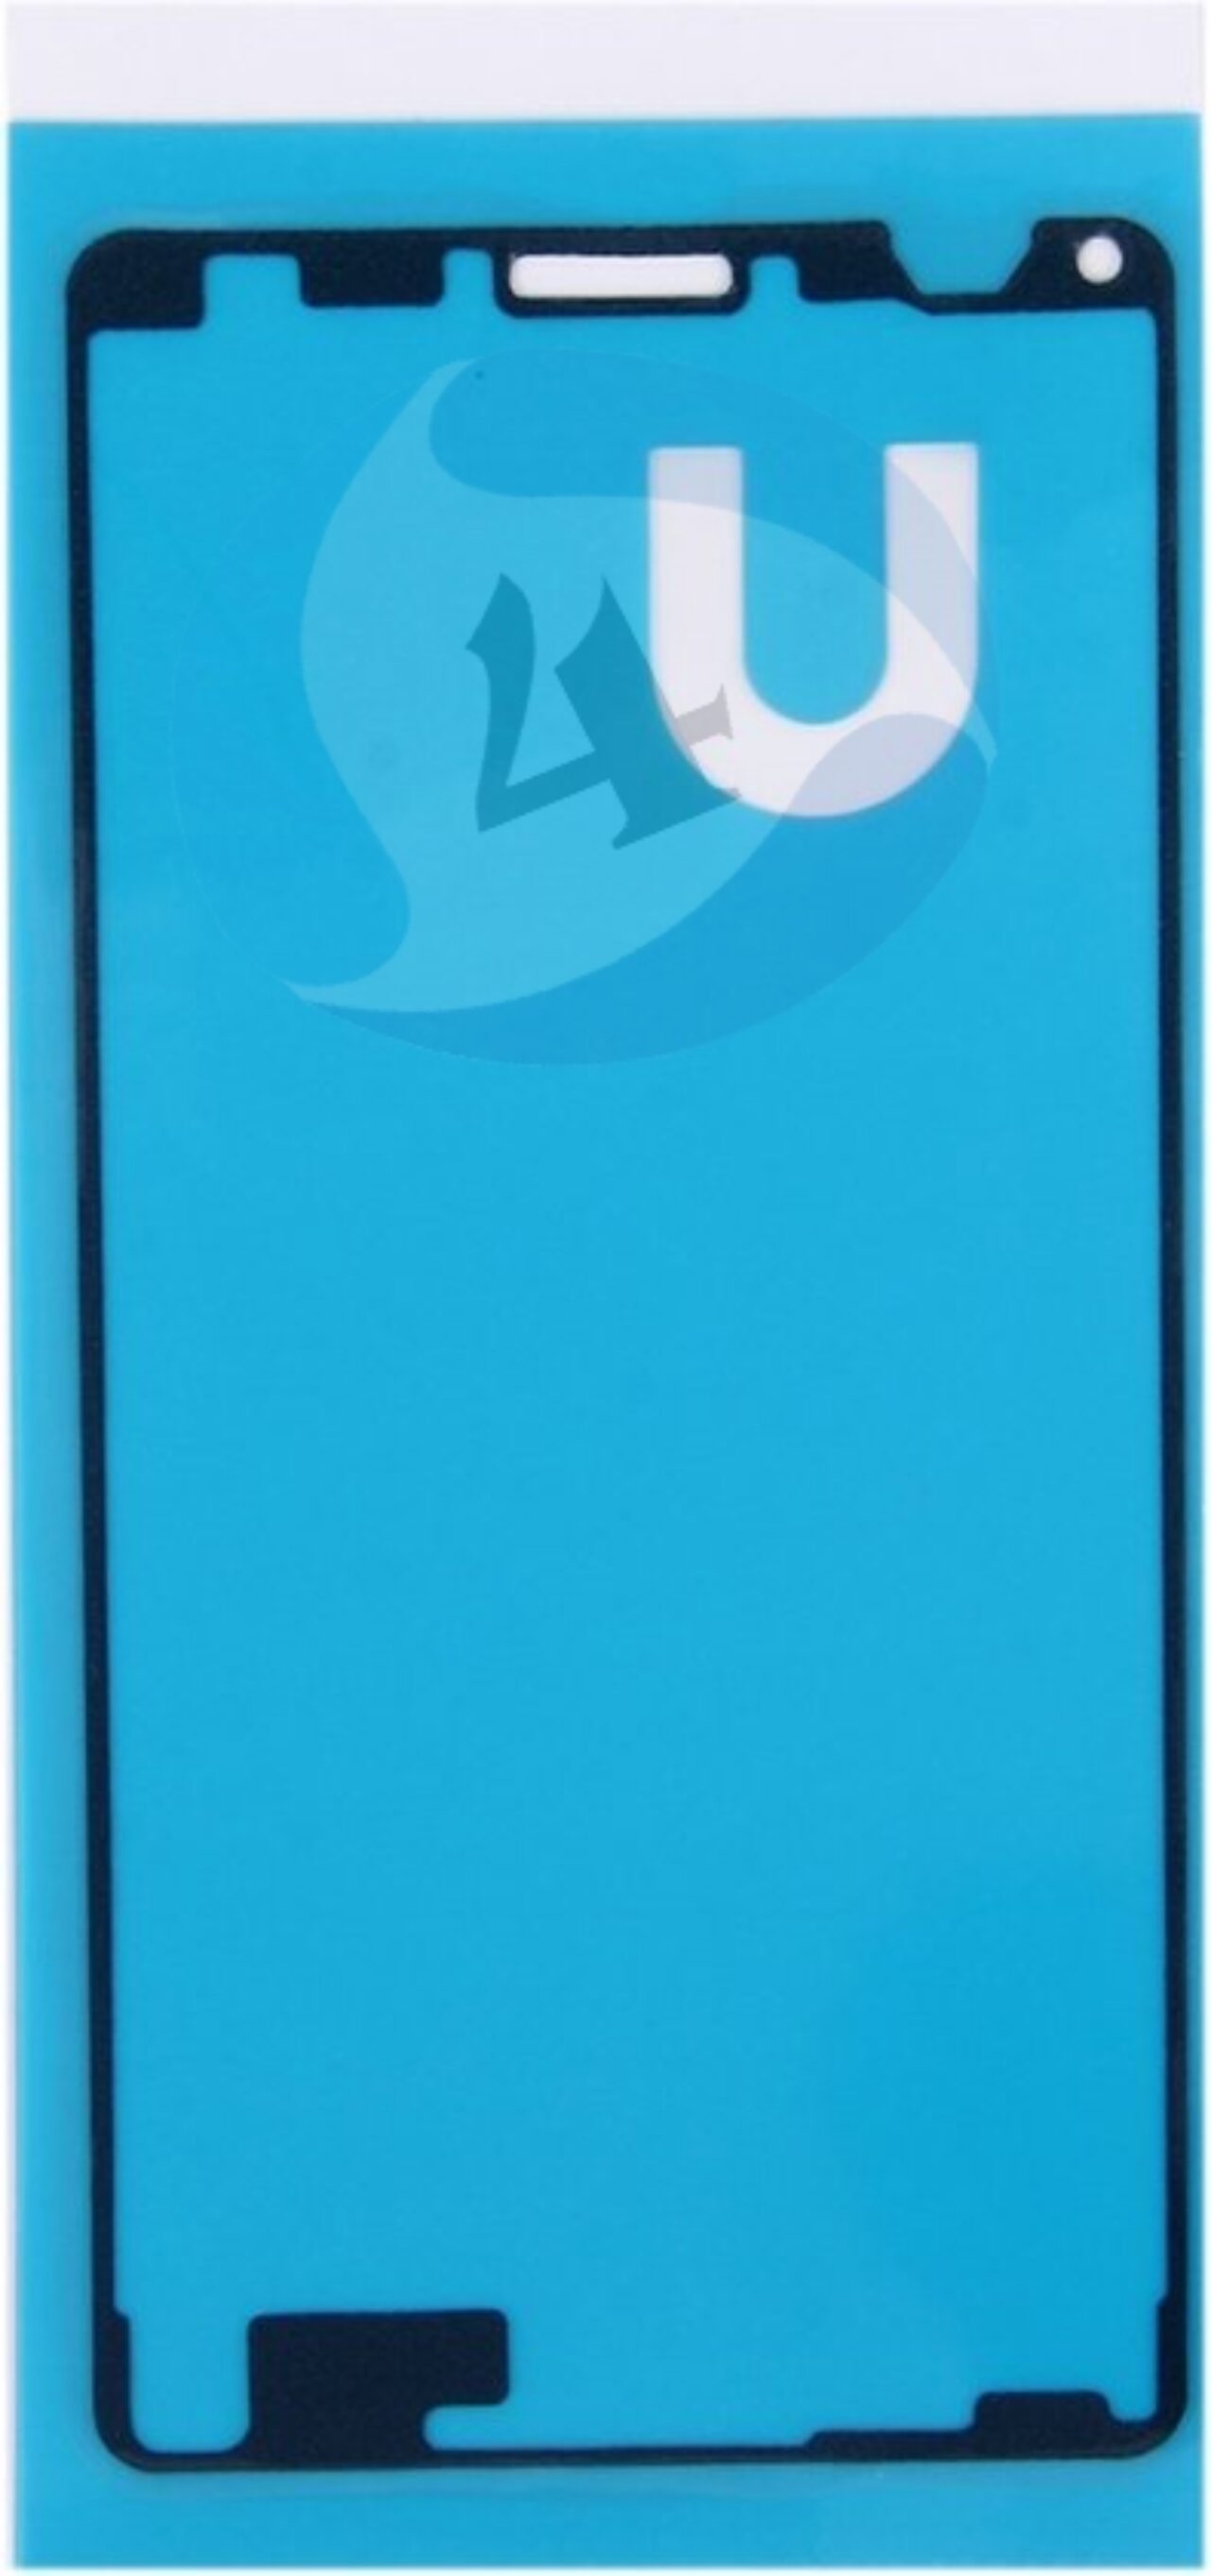 Sony Xperia Z3 Compact LCD adhesive sticker